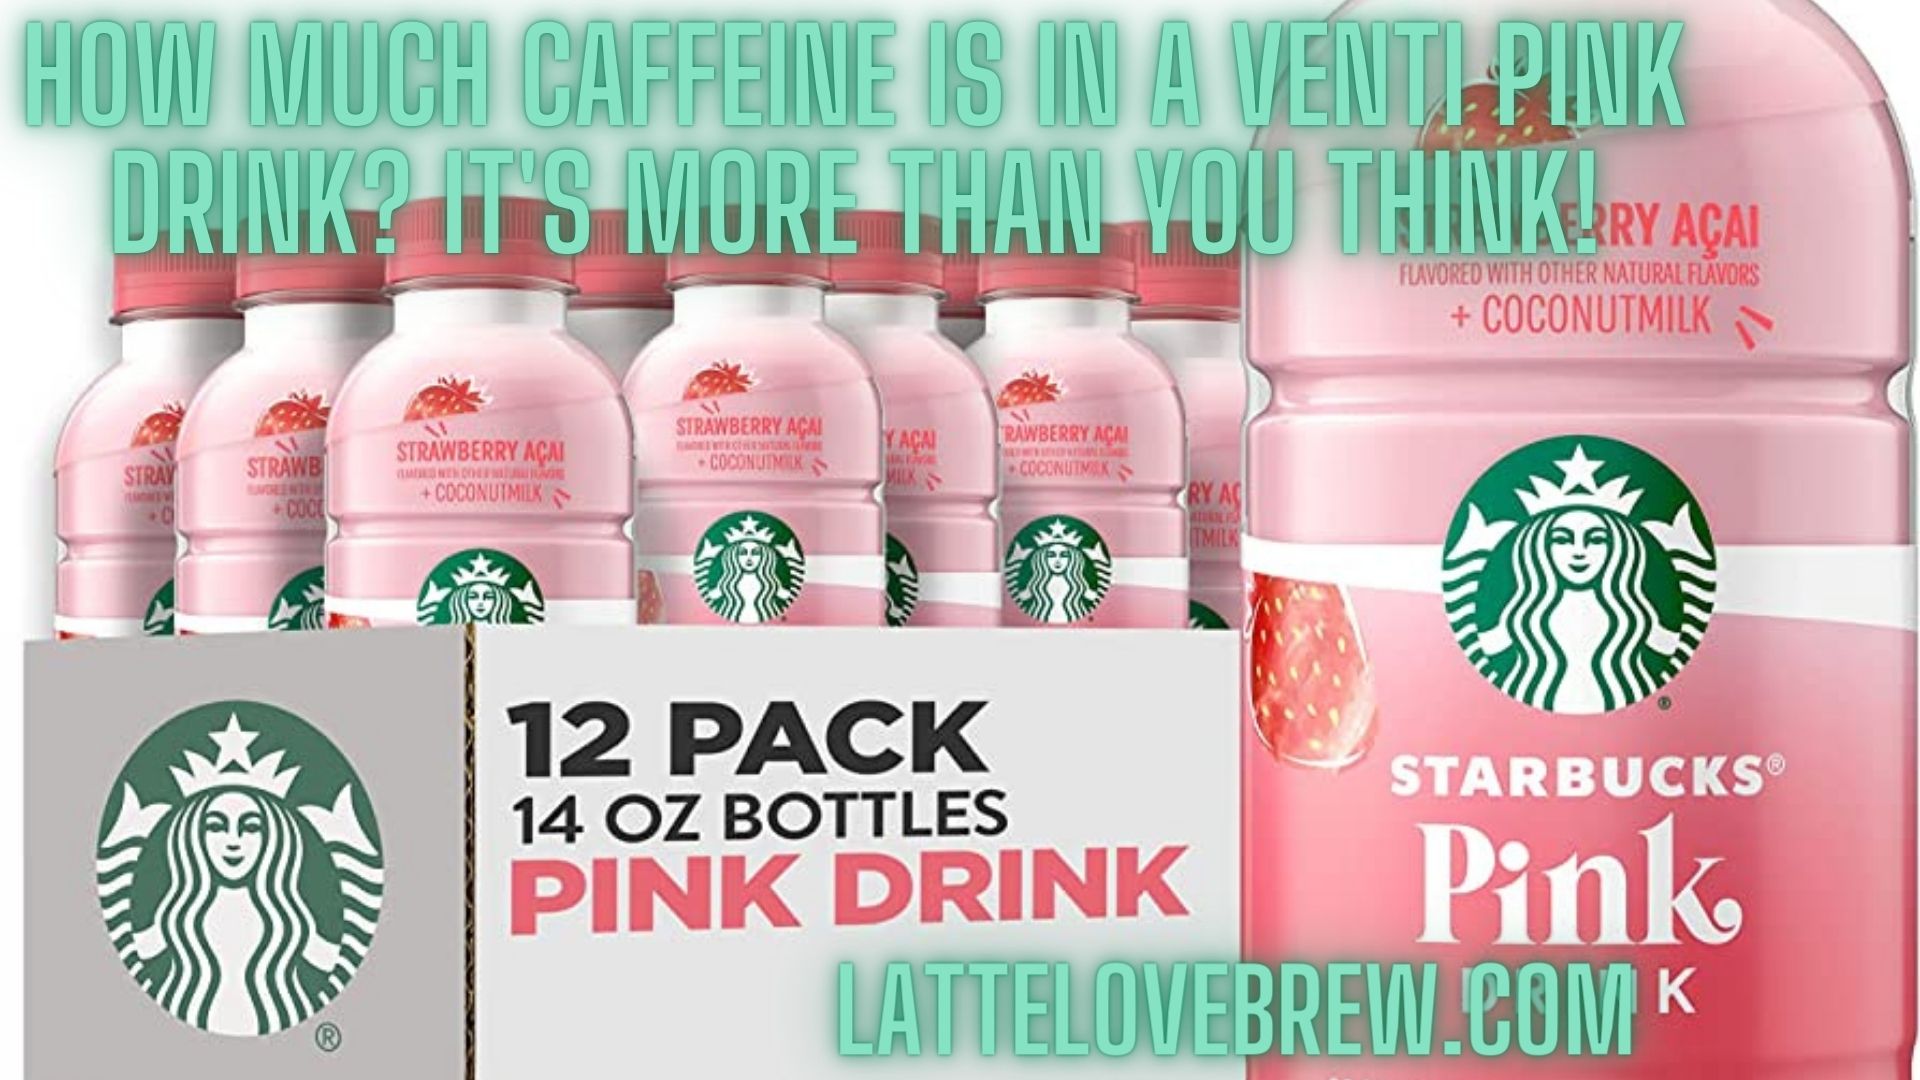 How Much Caffeine Is In A Venti Pink Drink? It's More Than You Think